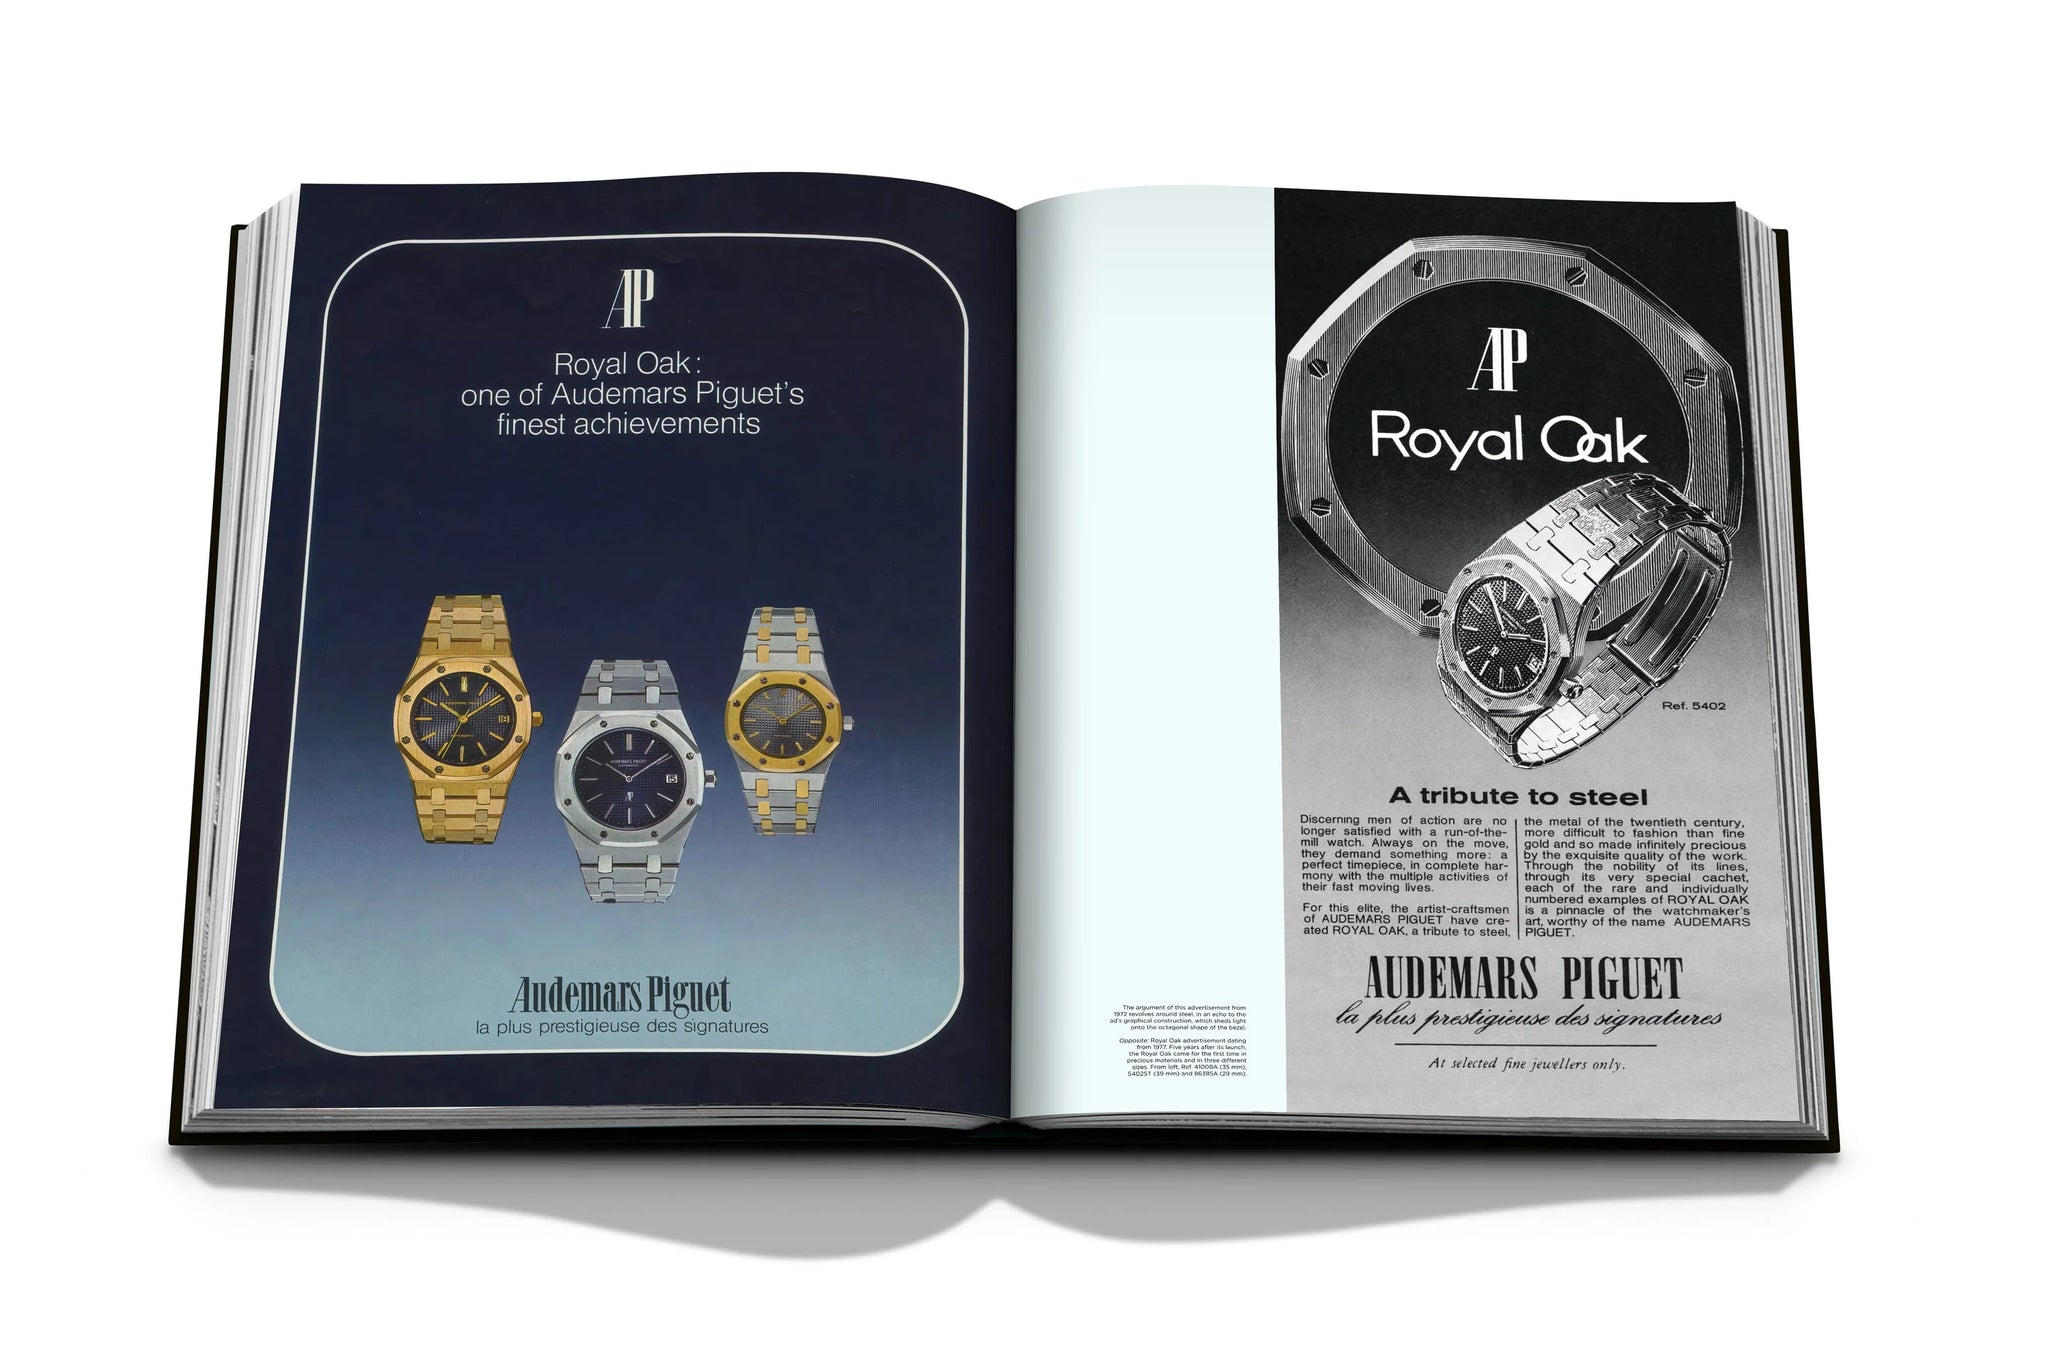 ASSOULINE Royal Oak: From Iconoclast to Icon by Bill Prince